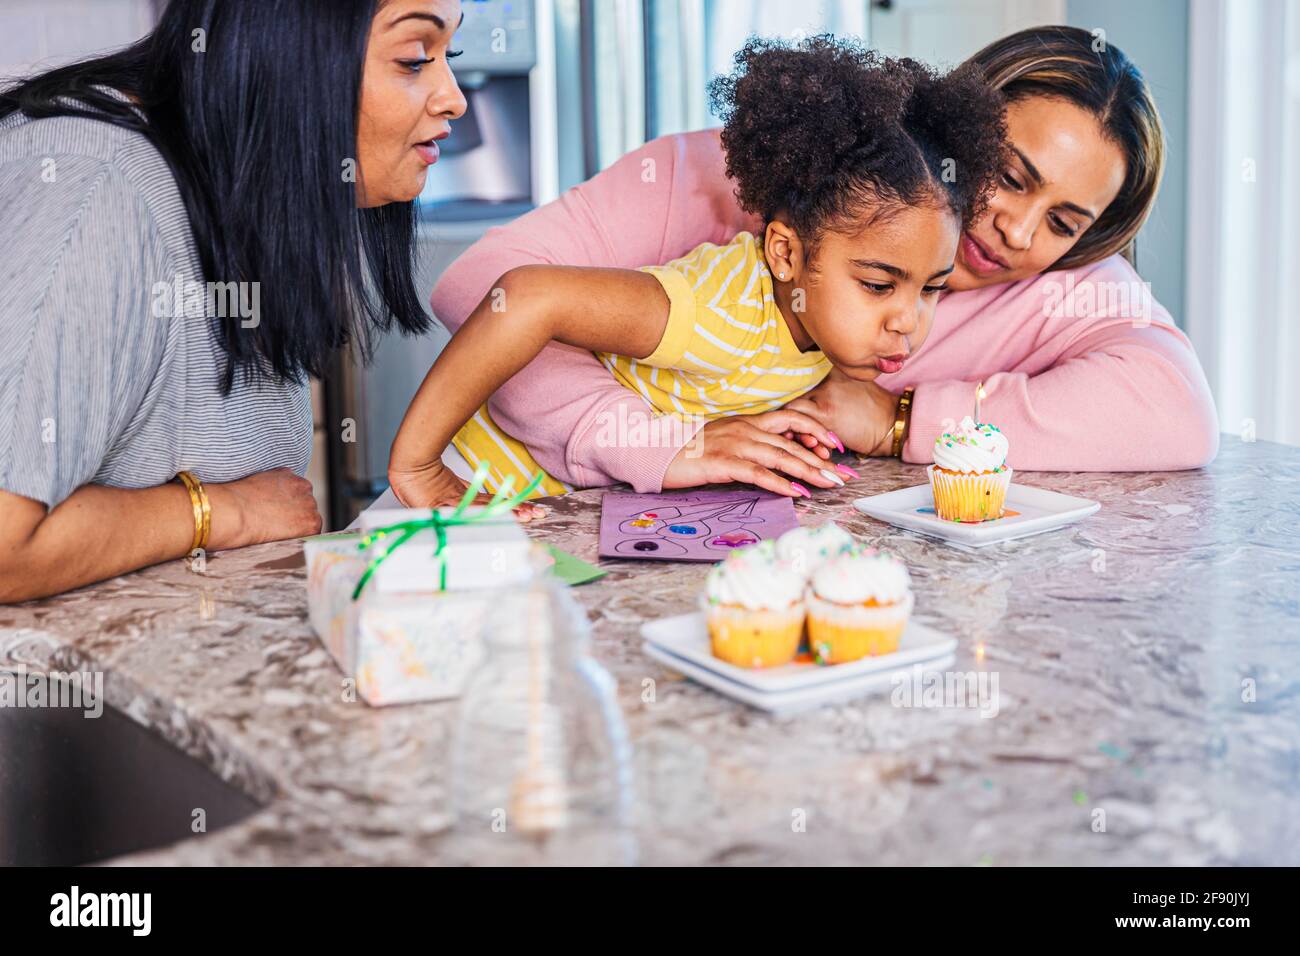 Girl blowing candle on cupcake while celebrating birthday with mother and grandmother at home Stock Photo